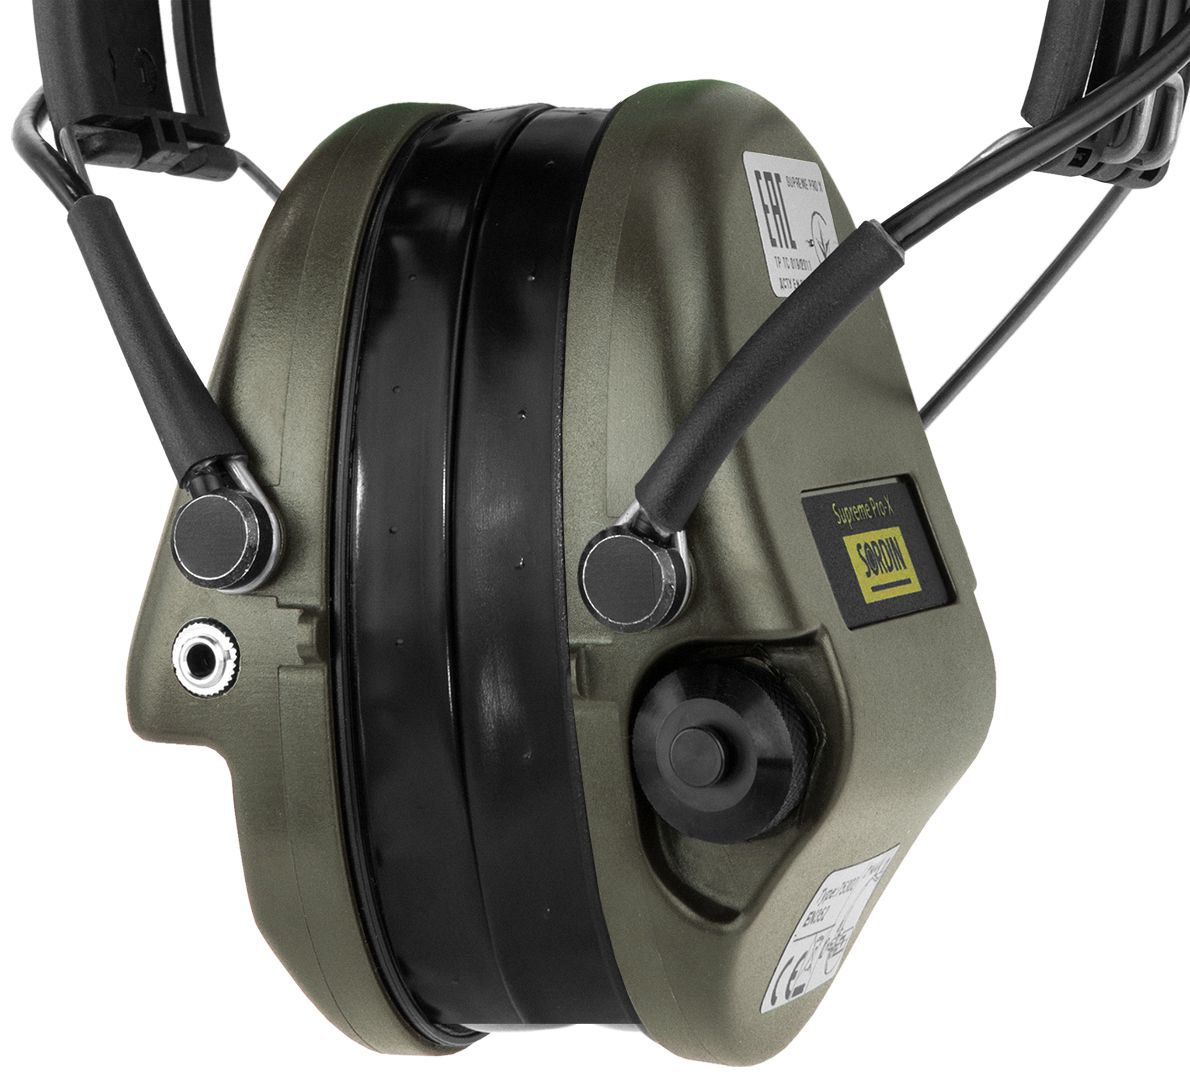 Sordin EXC Passive Hearing Protection Headset